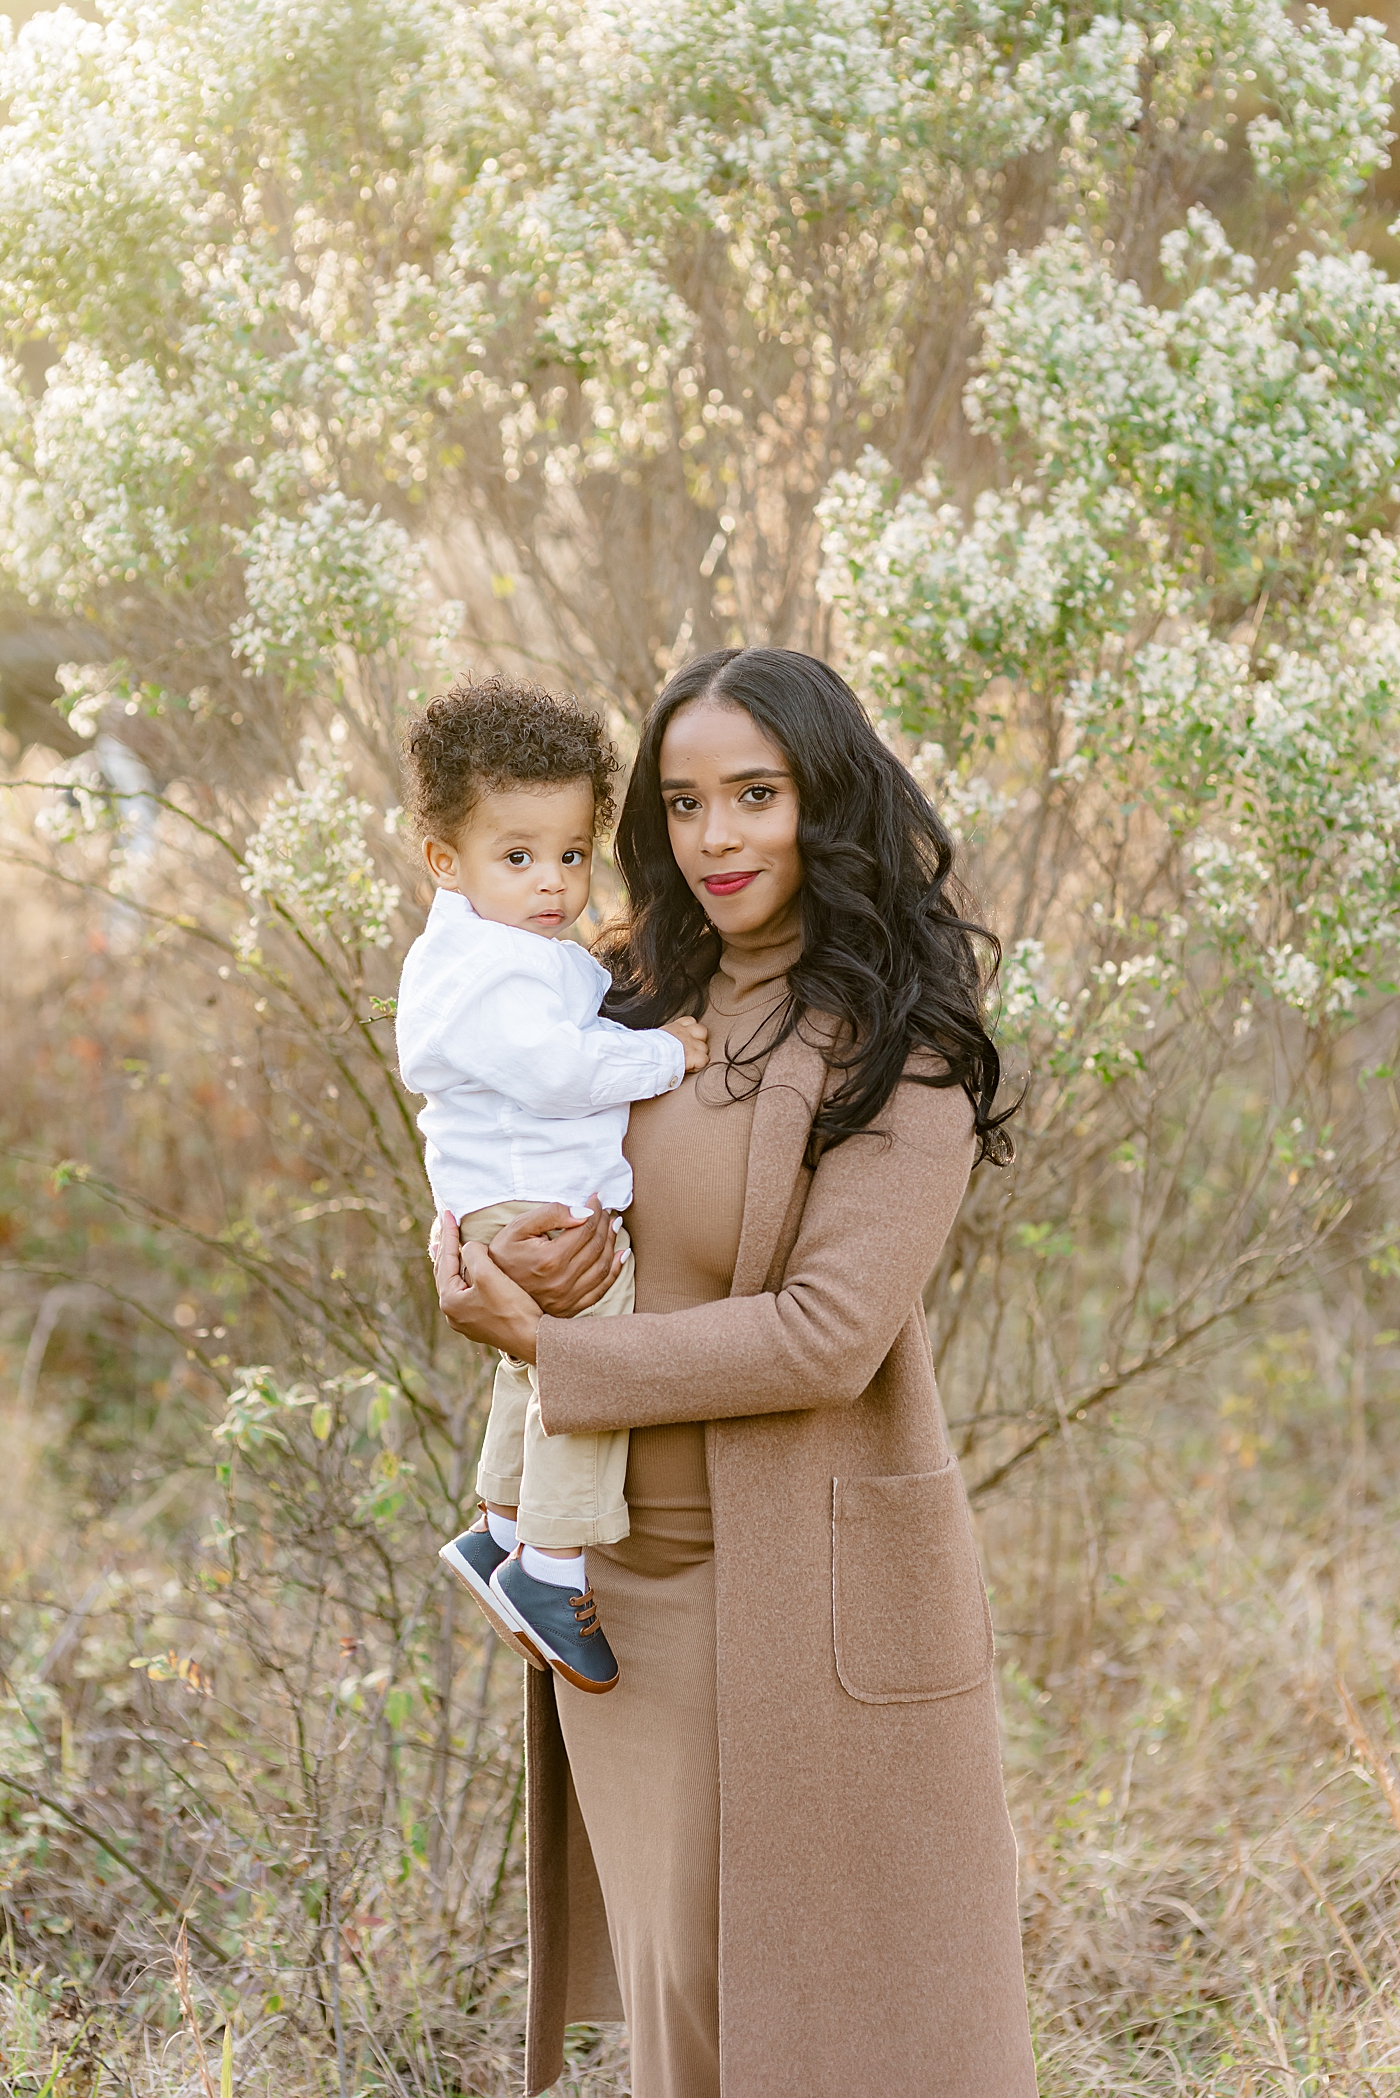 Mom in brown holding her baby boy | Photo by Anna Wisjo Photography